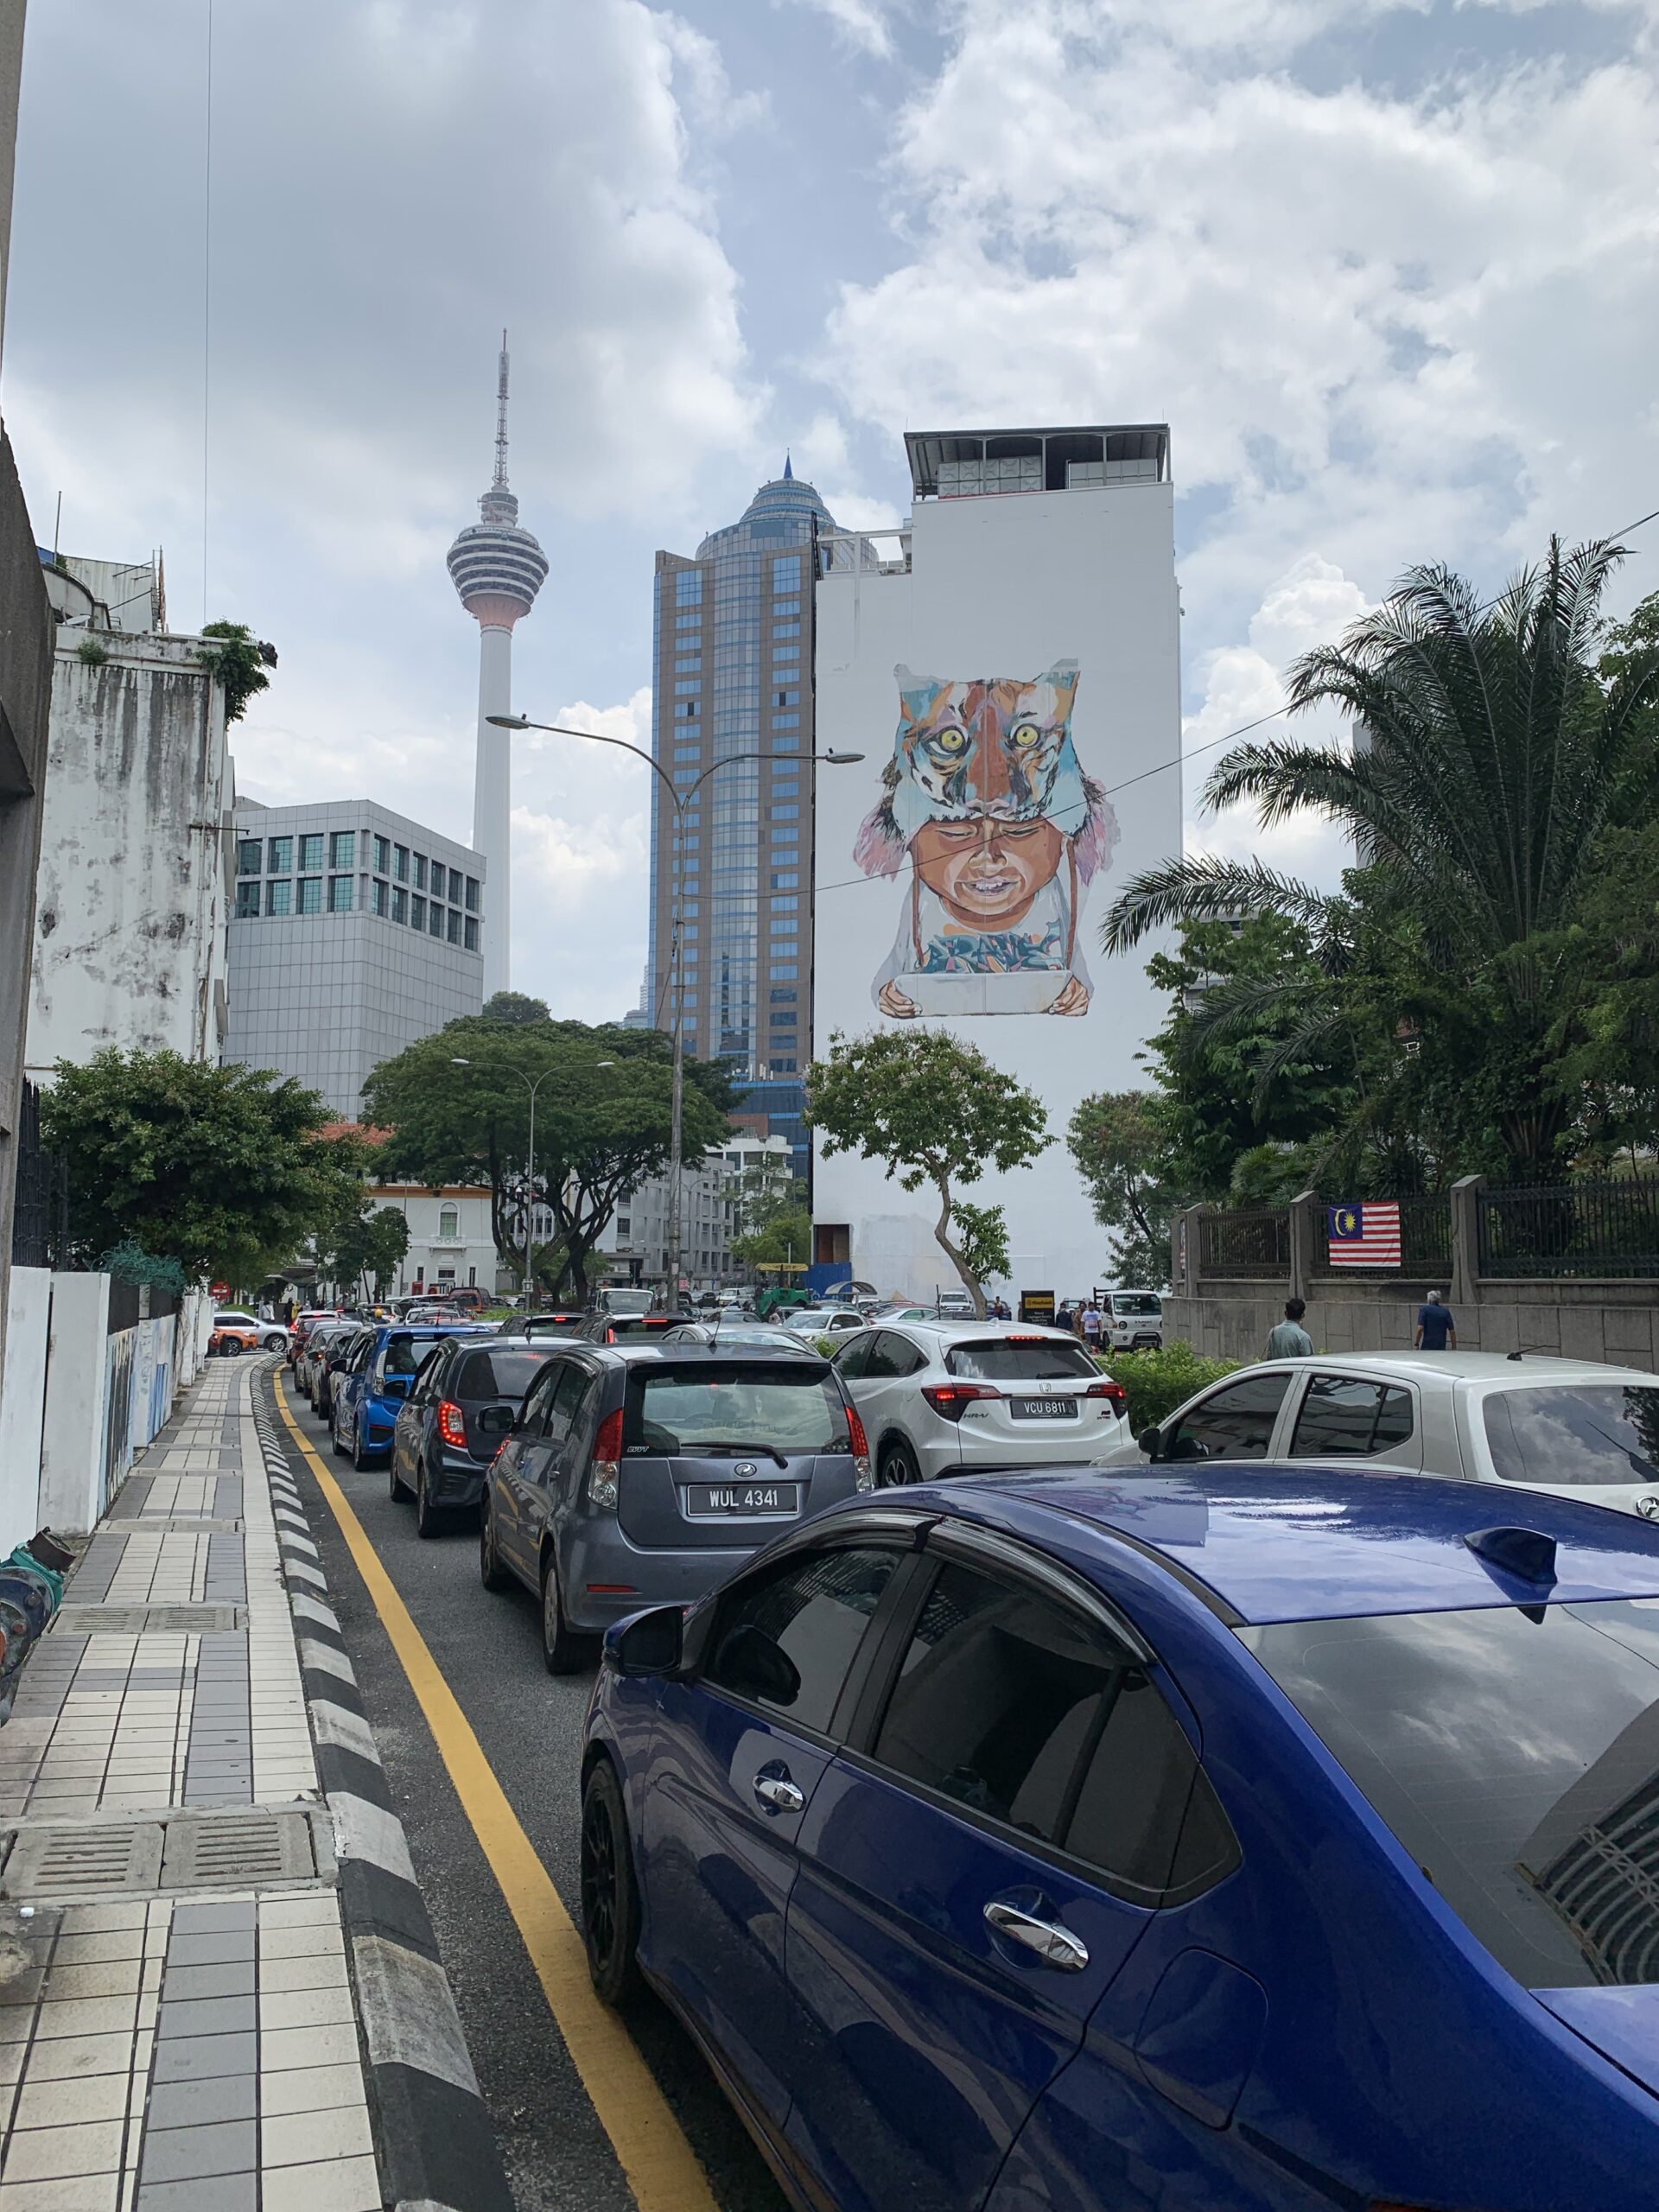 6 things in kl that don't make sense from a penangite's pov